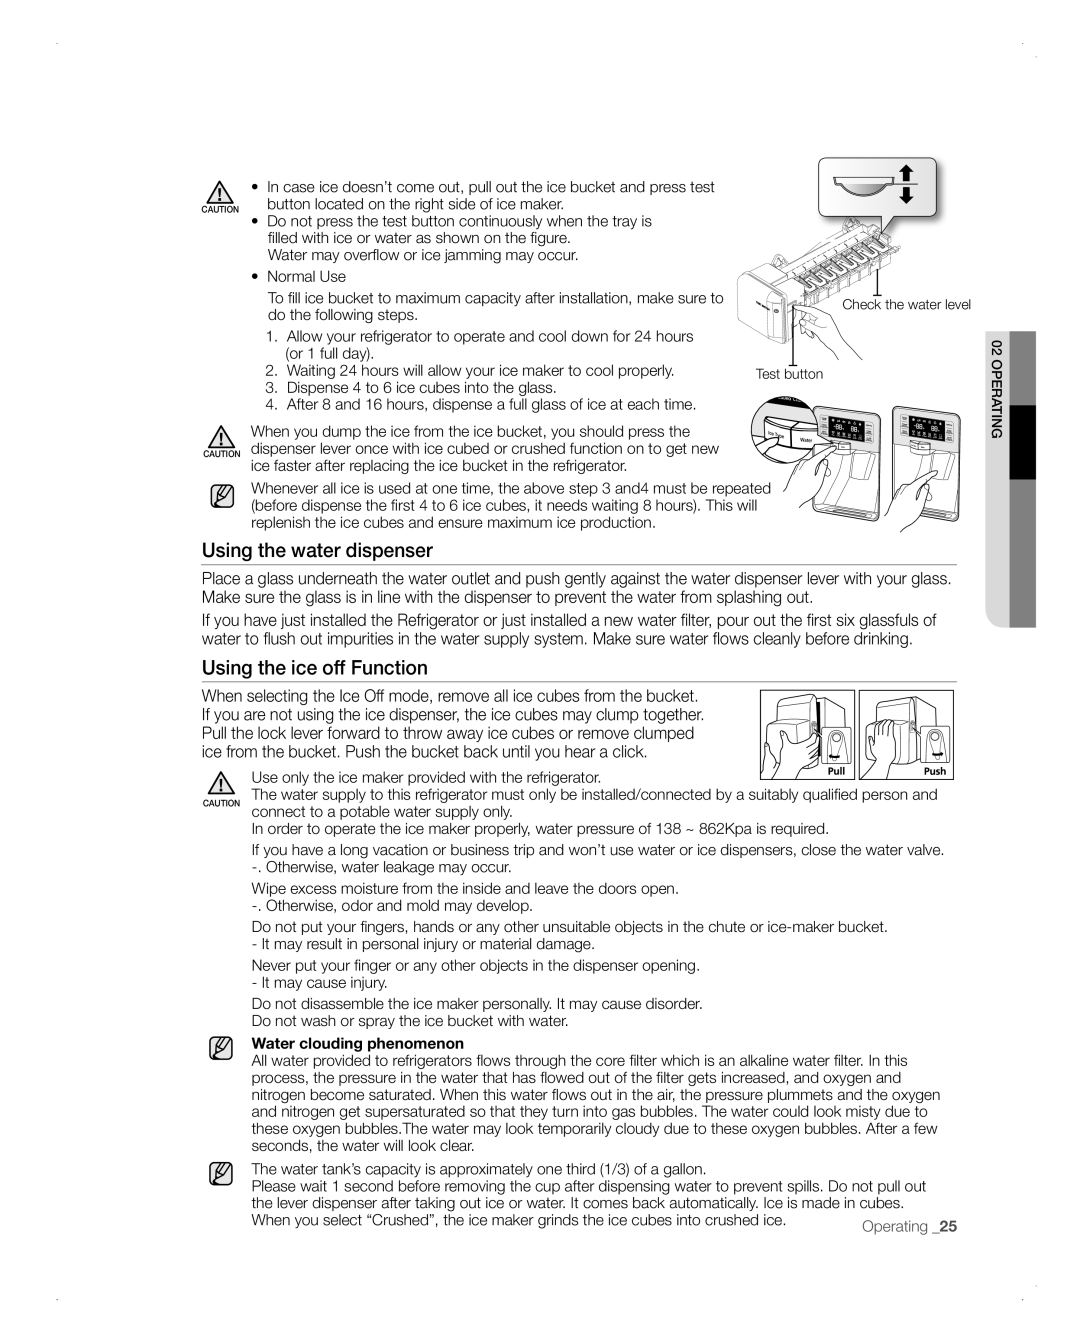 Samsung RFG298AARS user manual Using the water dispenser, Using the ice off Function, Water clouding phenomenon 